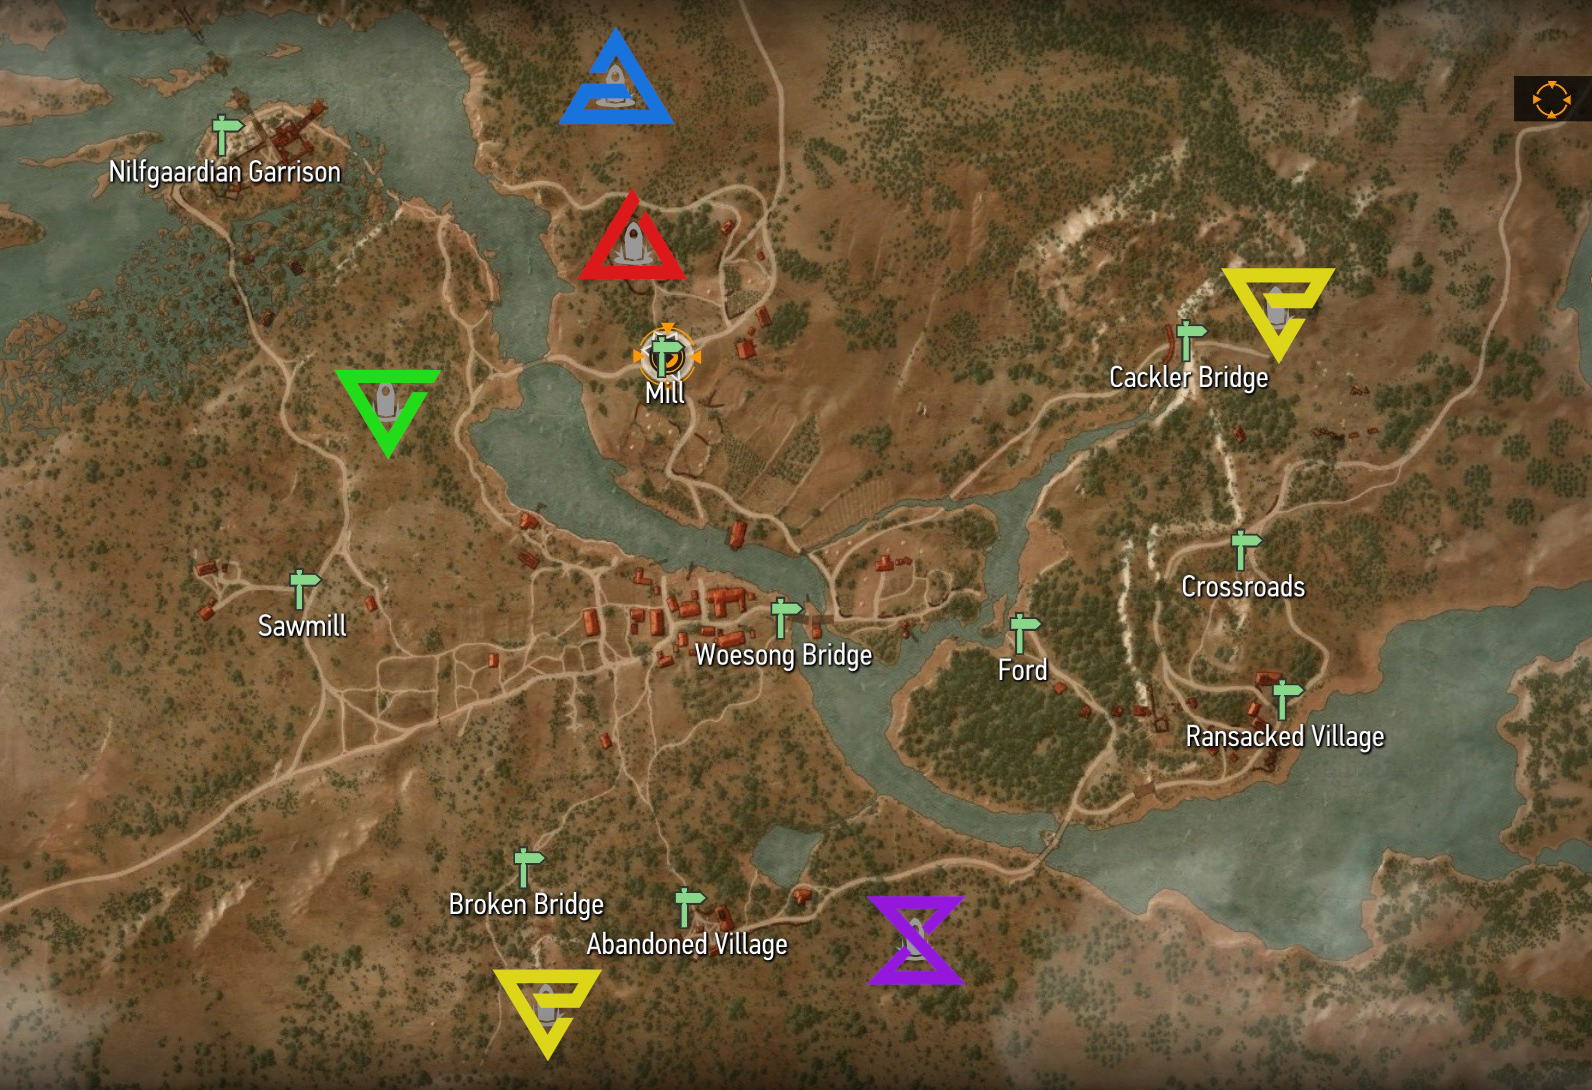 The Witcher 3 - An annotated map of White Orchard with places of power as described in text below.